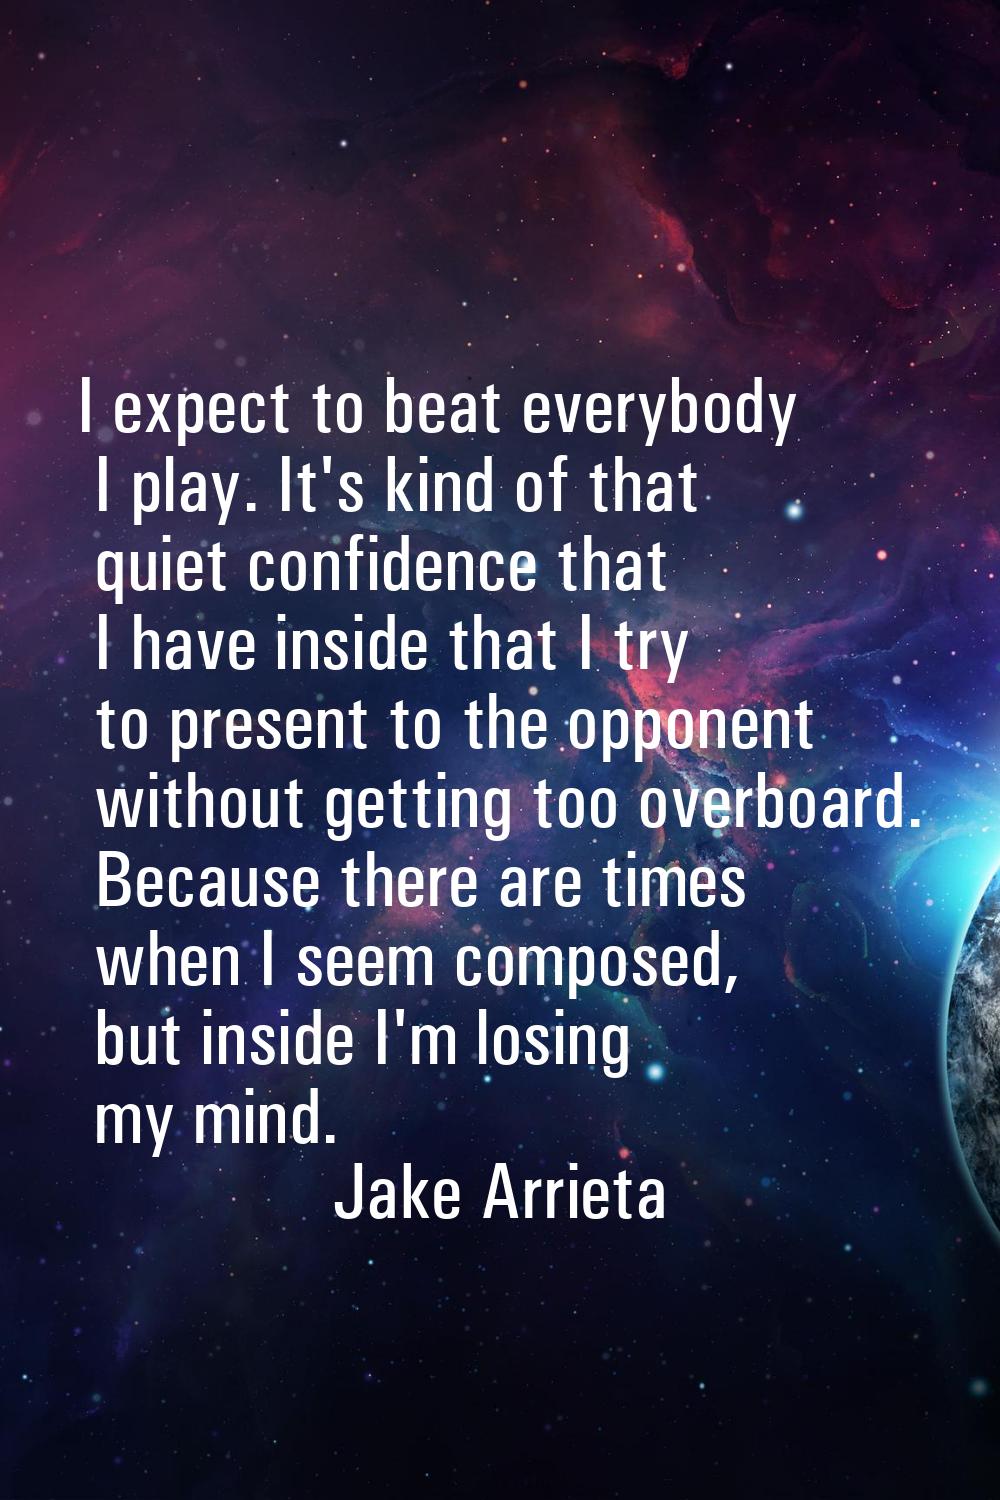 I expect to beat everybody I play. It's kind of that quiet confidence that I have inside that I try